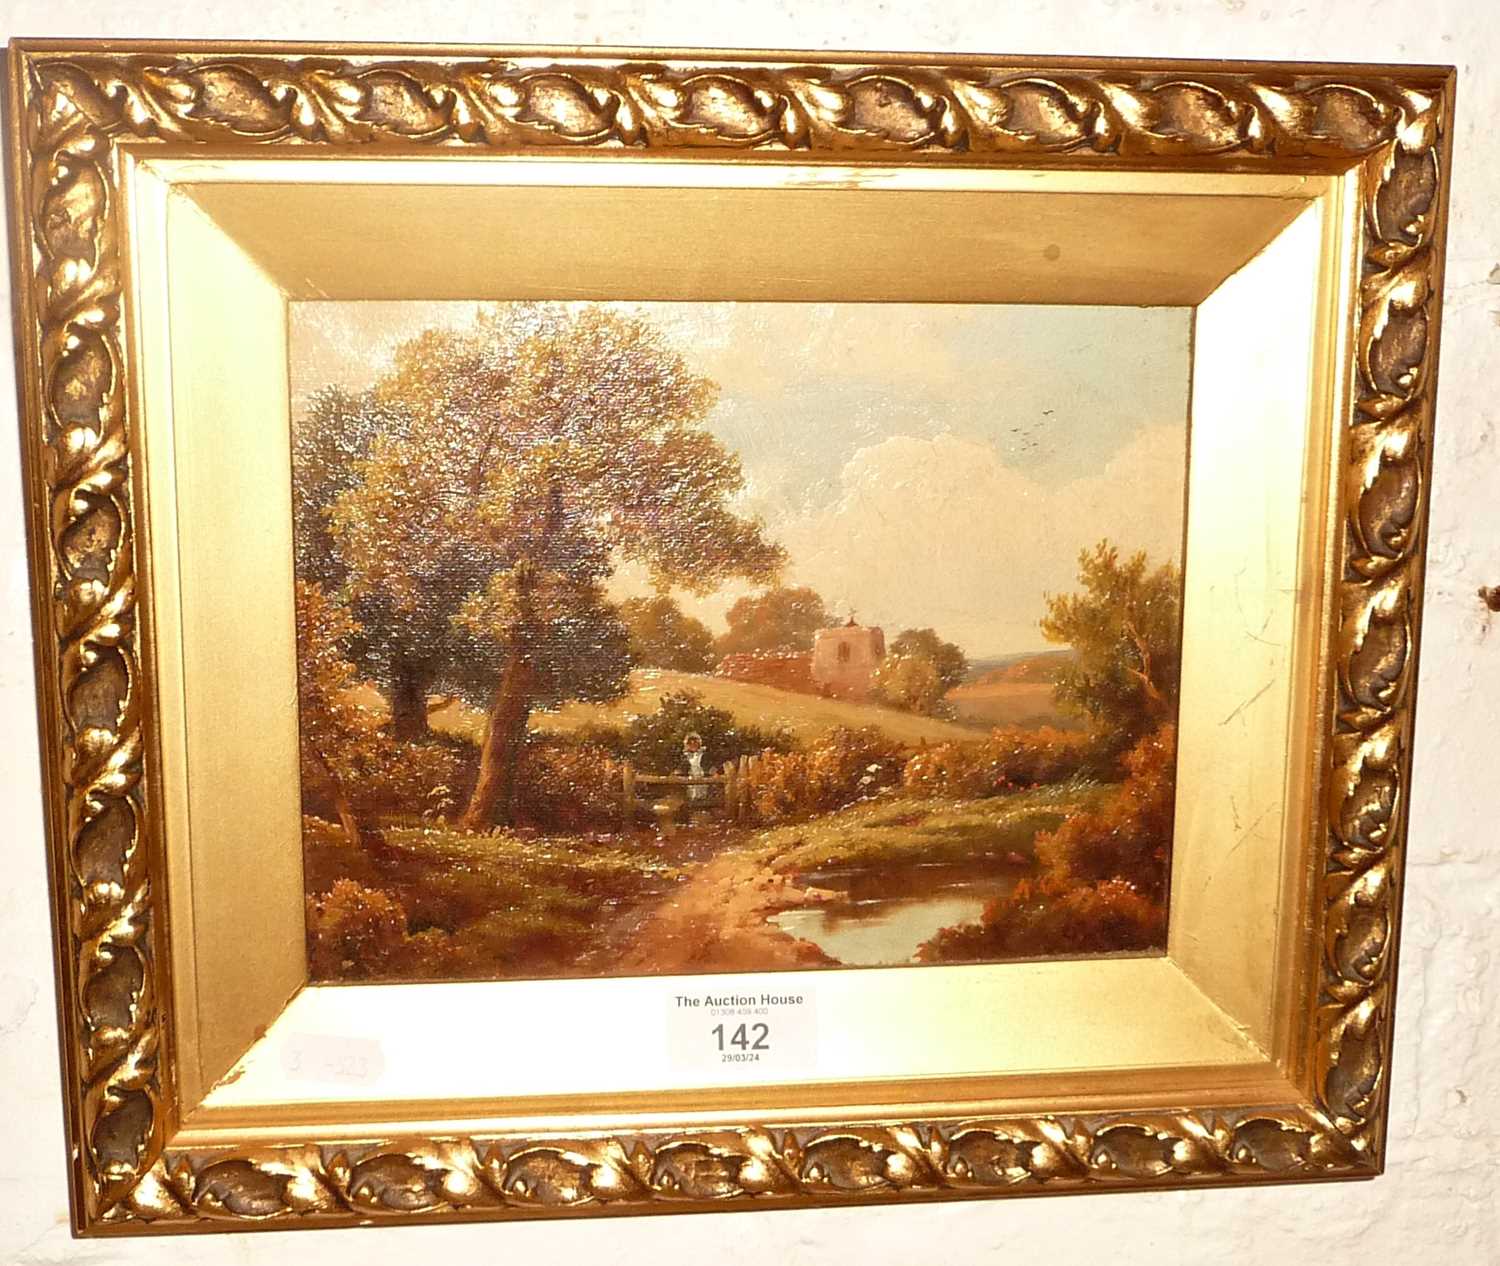 Small Victorian oil on canvas of a rural landscape, 11" x 13" inc. frame